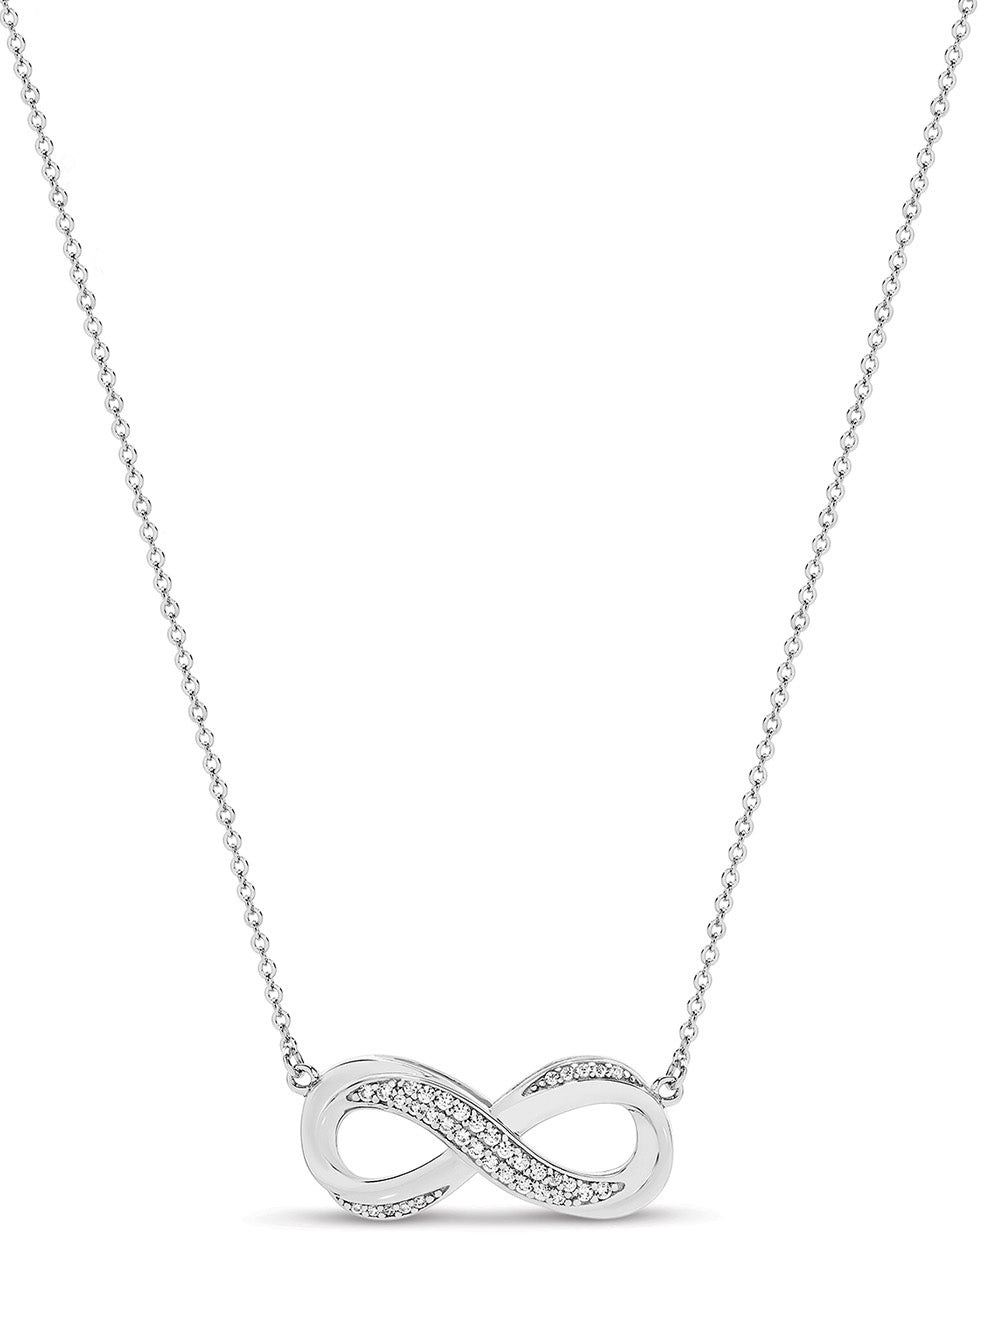 Sterling Silver CZ Infinity Necklace. 40 + 5cm